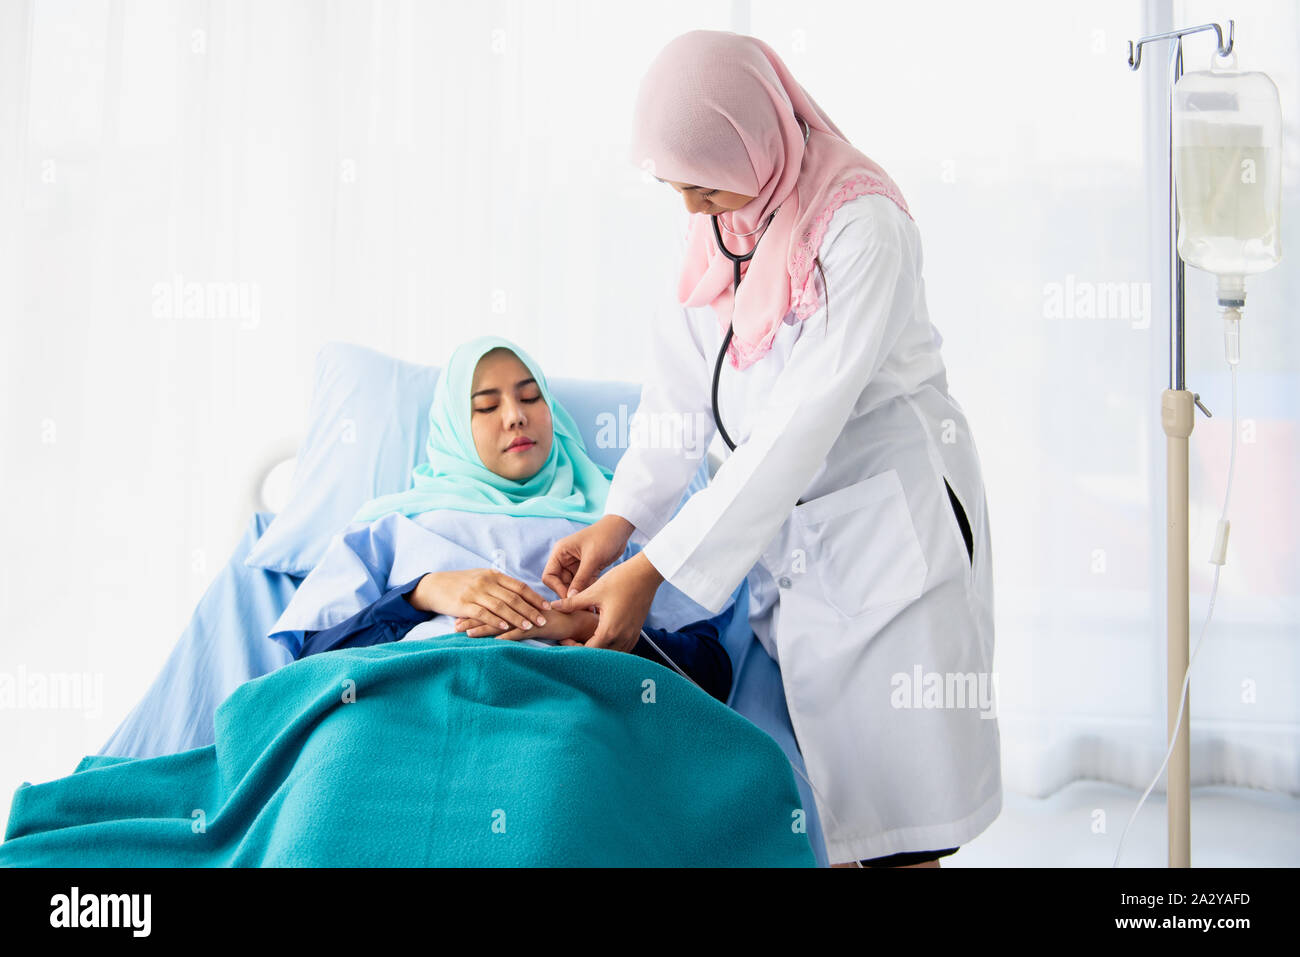 A beautiful young Muslim woman doctor is giving the saline solution to the patient in the arm who is lying on the bed in the hospital room. Stock Photo